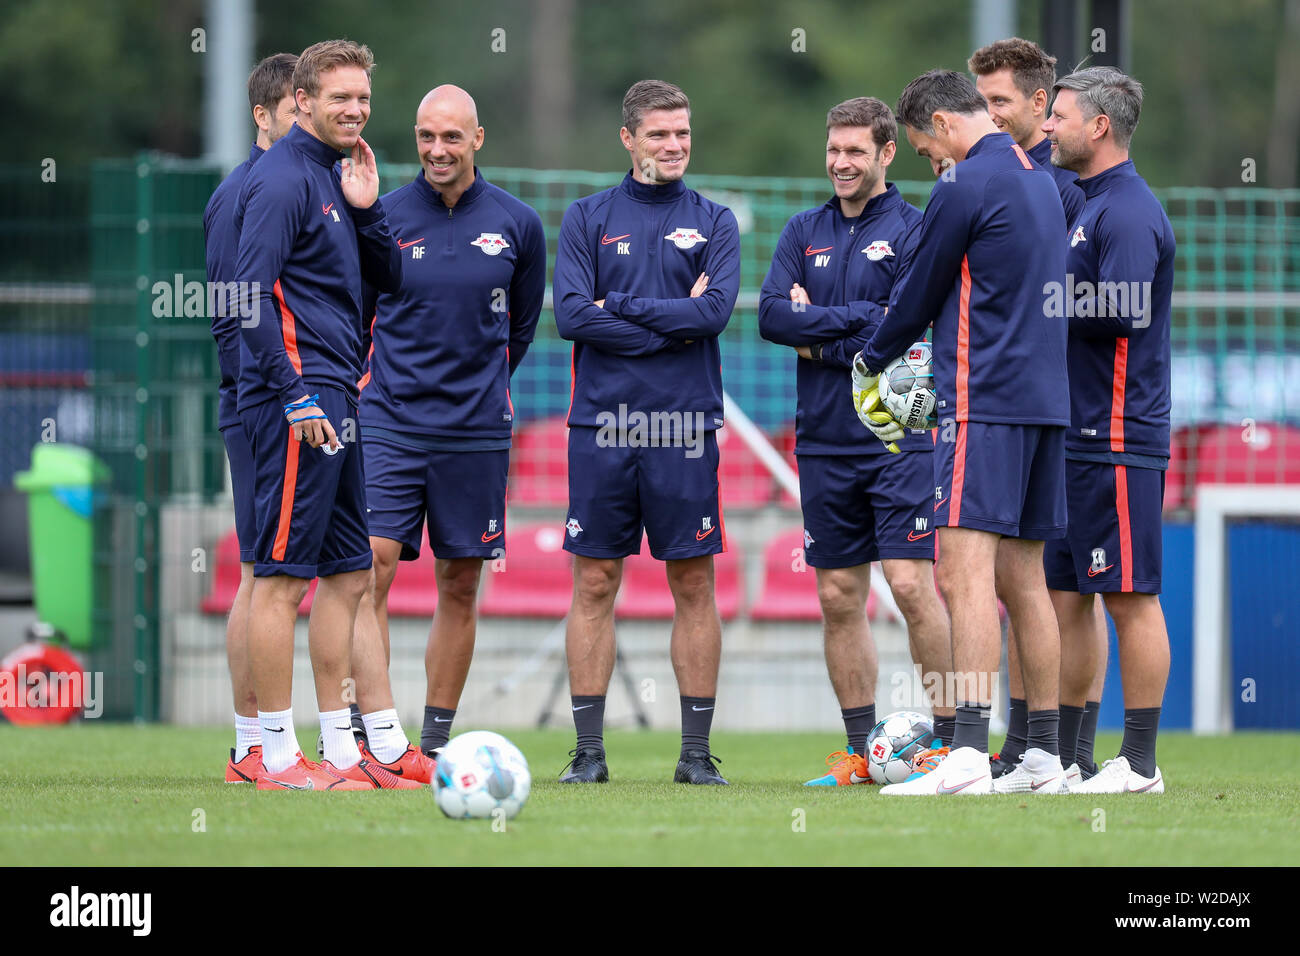 08 July 2019, Saxony, Leipzig: Soccer: Bundesliga, RB Leipzig. The new coach Julian Nagelsmann (2nd from left) and his trainer team Benjamin Glück, video analyst (l-r), Ruwen Faller, athletics coach, Robert Klauss, co-trainer, Moritz Volz, co-trainer, Daniel Behlau, athletics coach, Kai Kraft, athletics coach and Frederik Gössling, goalkeeper coach, are on the pitch after the first training session. Photo: Jan Woitas/dpa-Zentralbild/dpa - IMPORTANT NOTE: In accordance with the requirements of the DFL Deutsche Fußball Liga or the DFB Deutscher Fußball-Bund, it is prohibited to use or have used Stock Photo